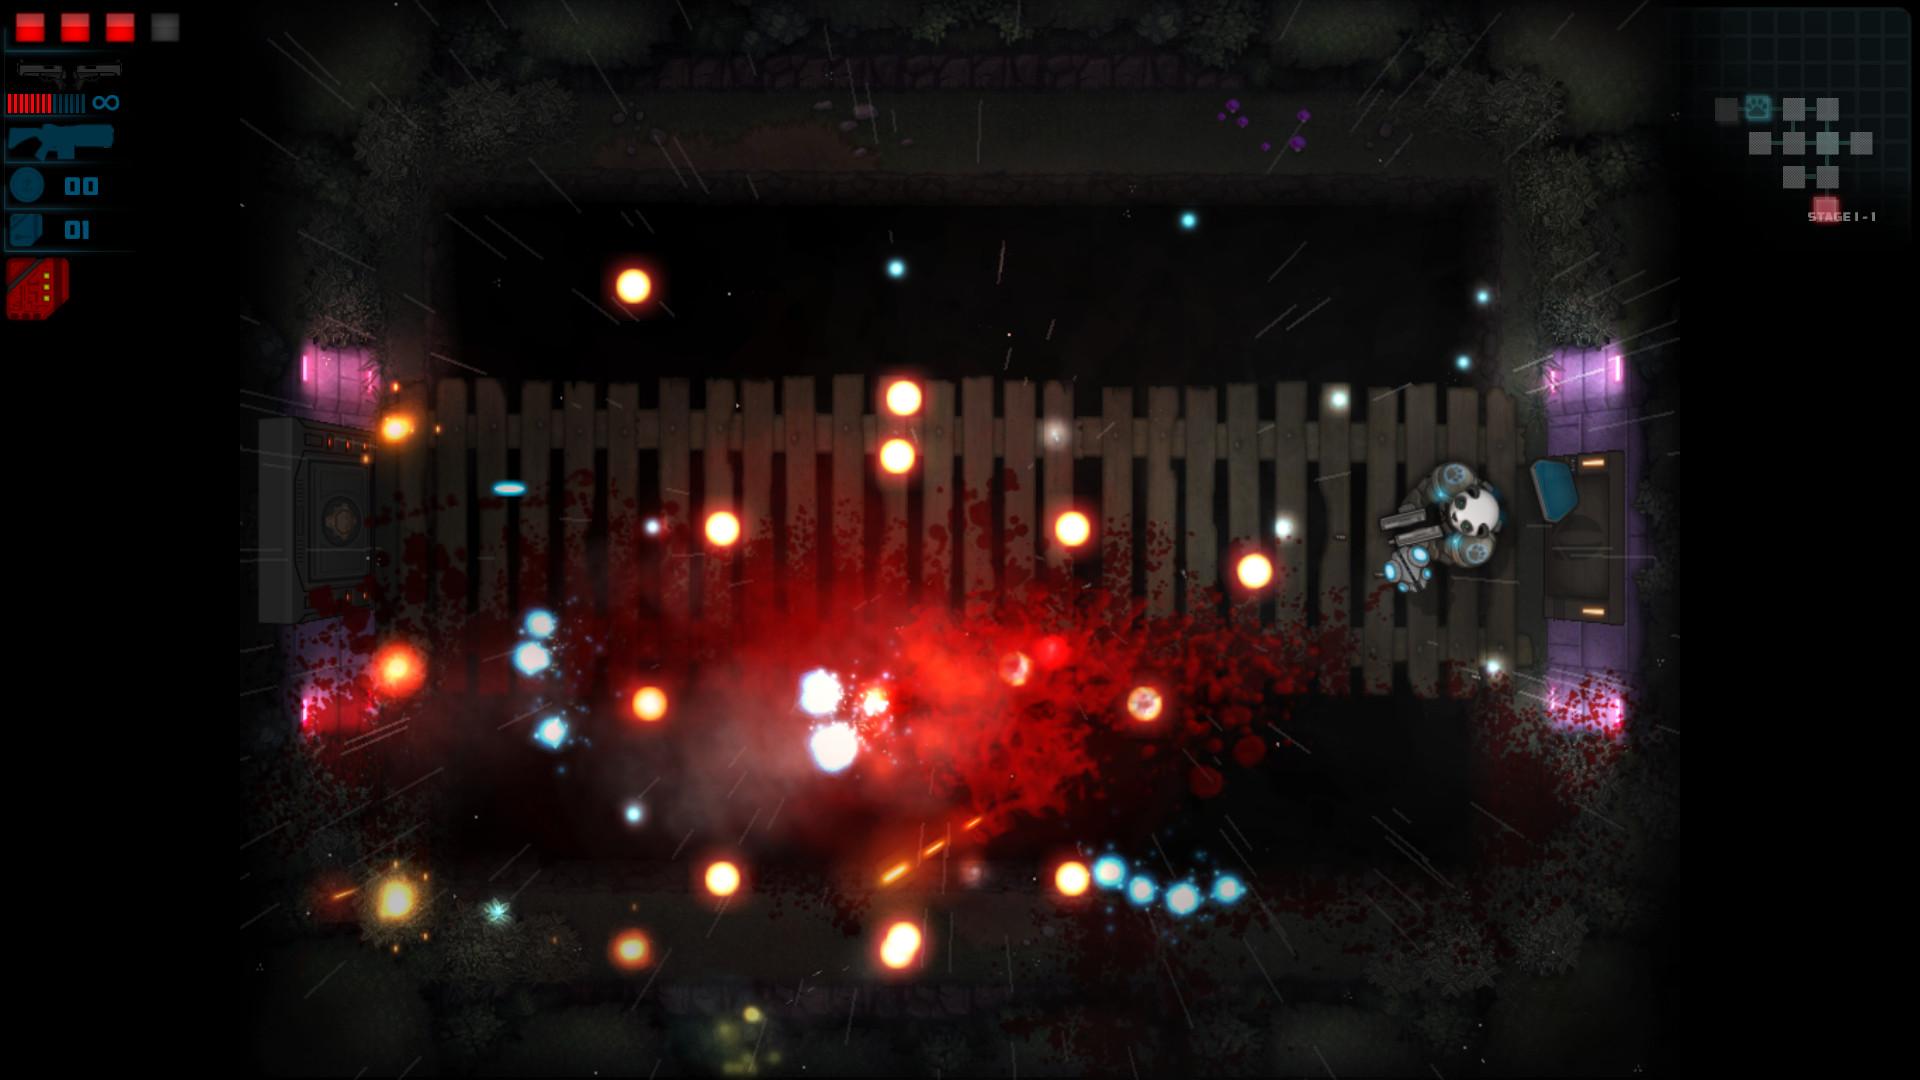 Screenshot №1 from game Feral Fury